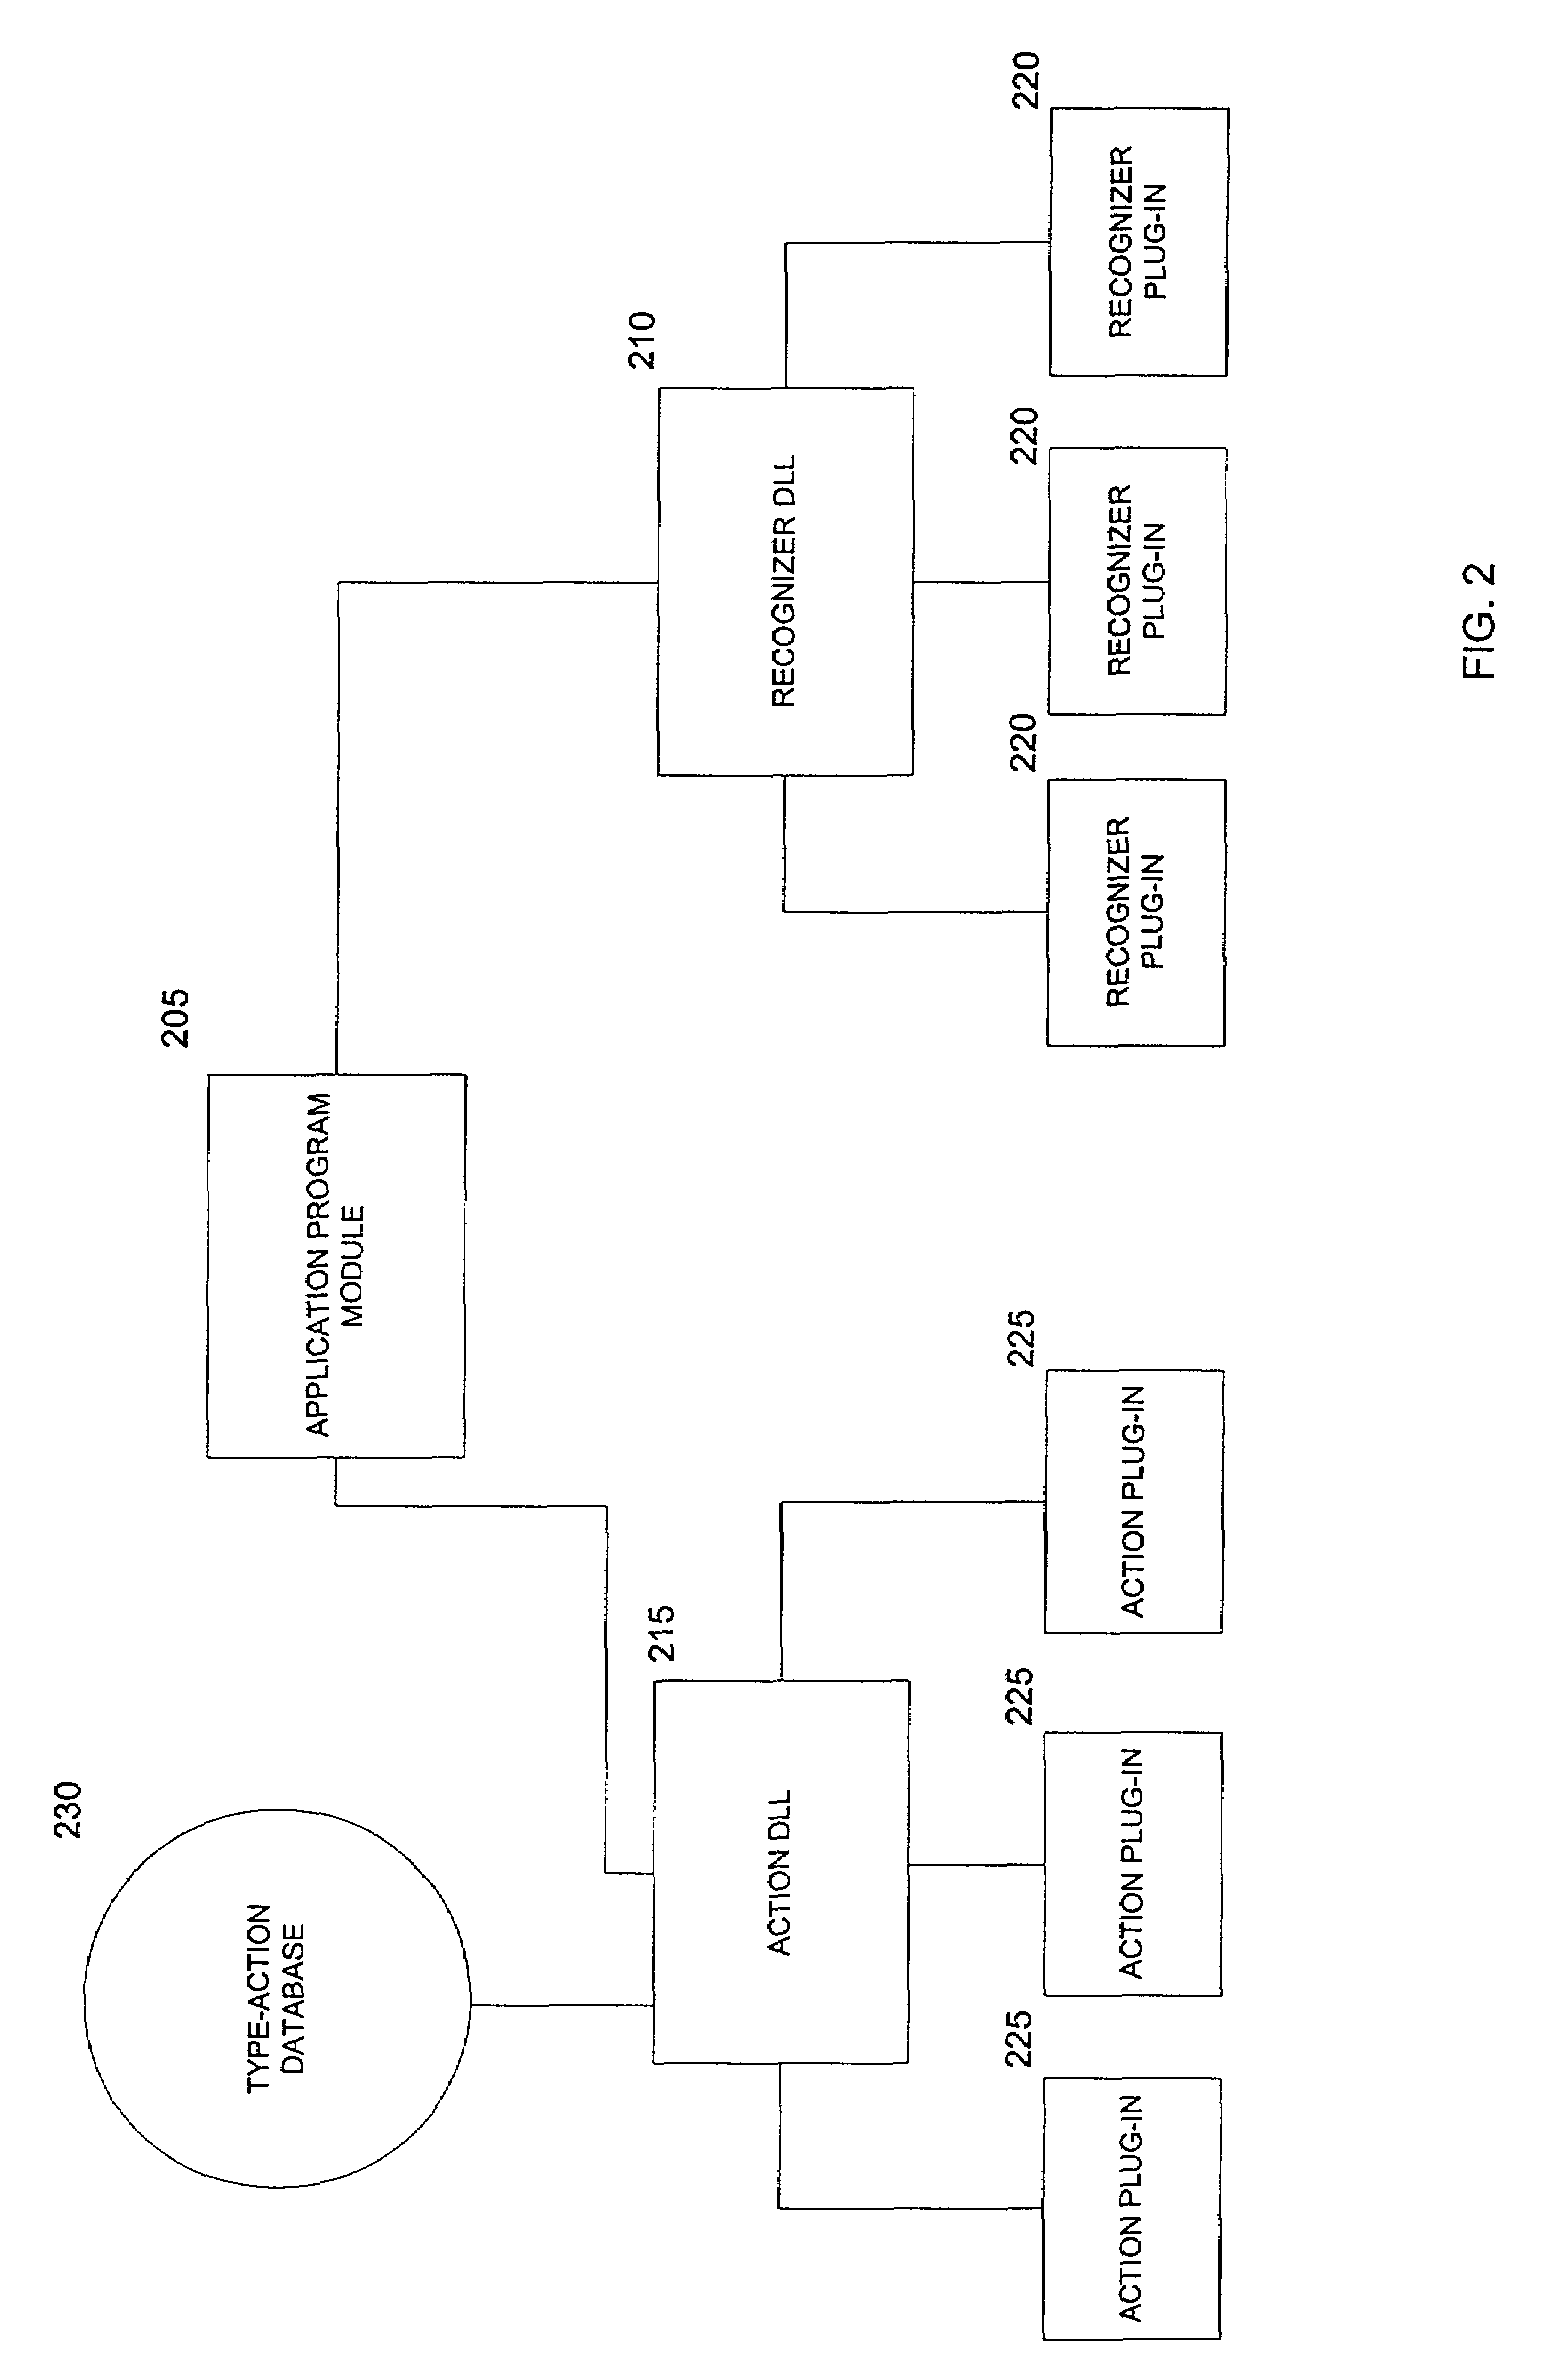 Method and system for providing restricted actions for recognized semantic categories